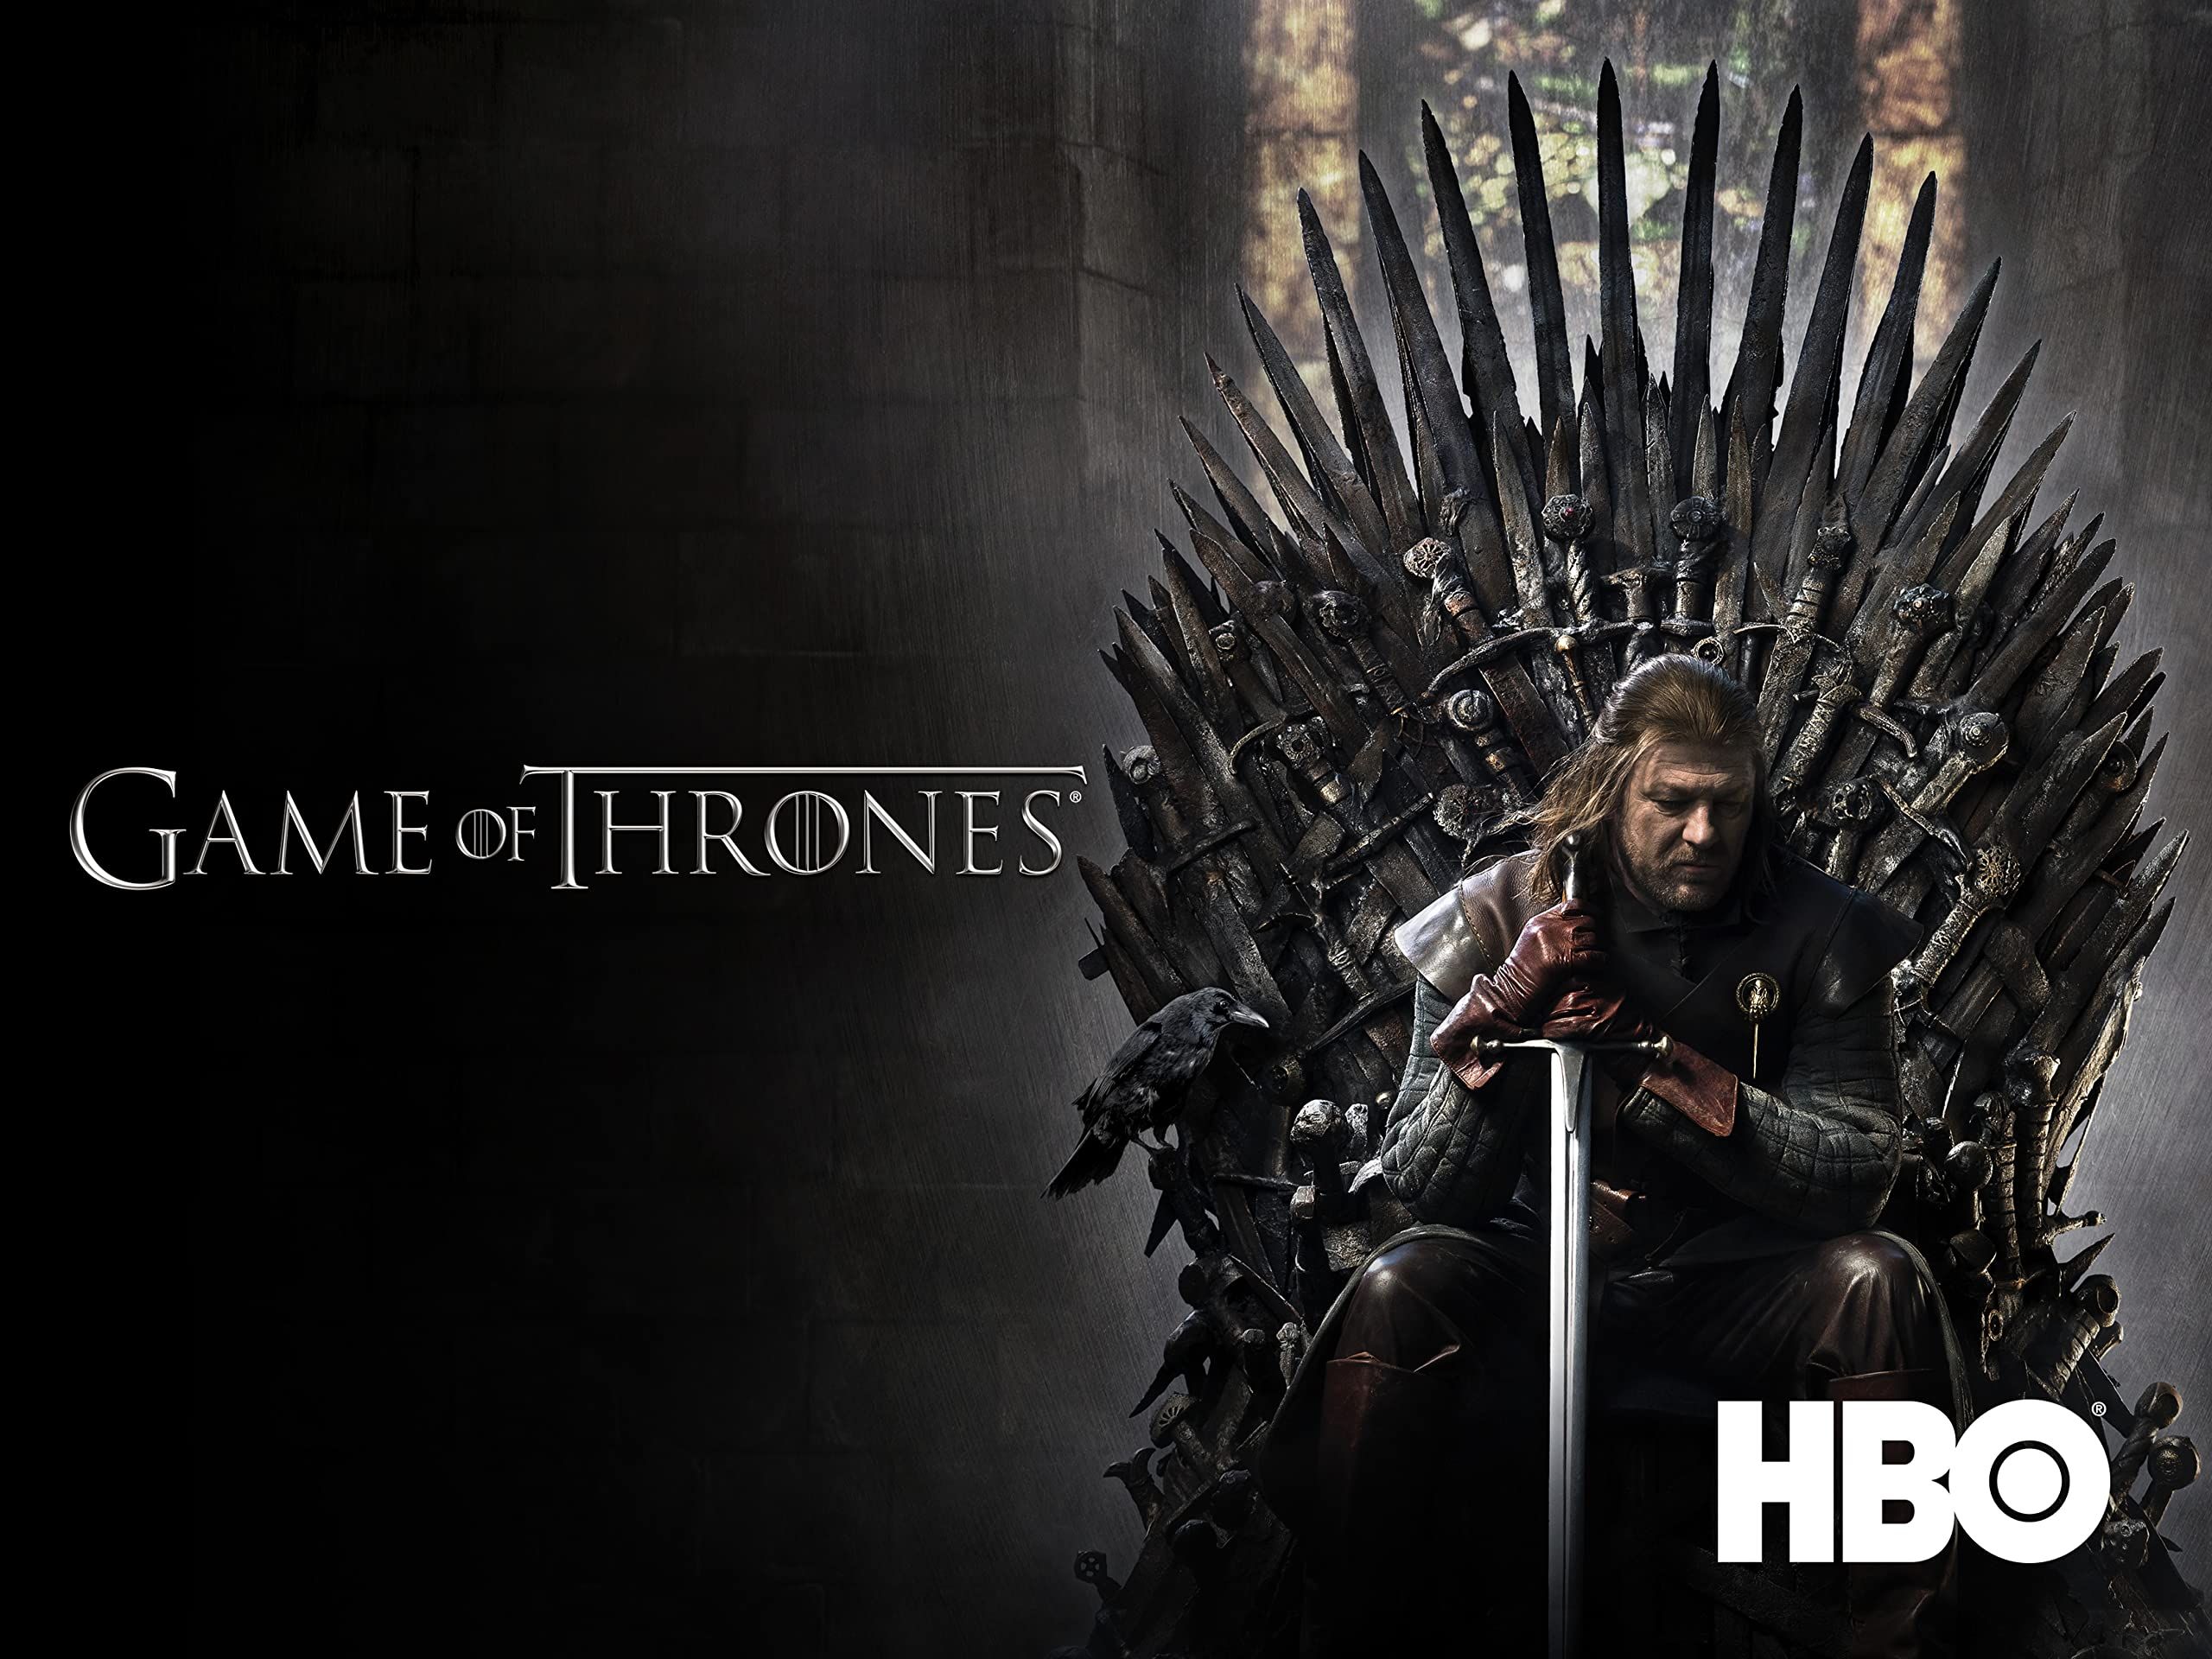 Game of Thrones on HBO promo image